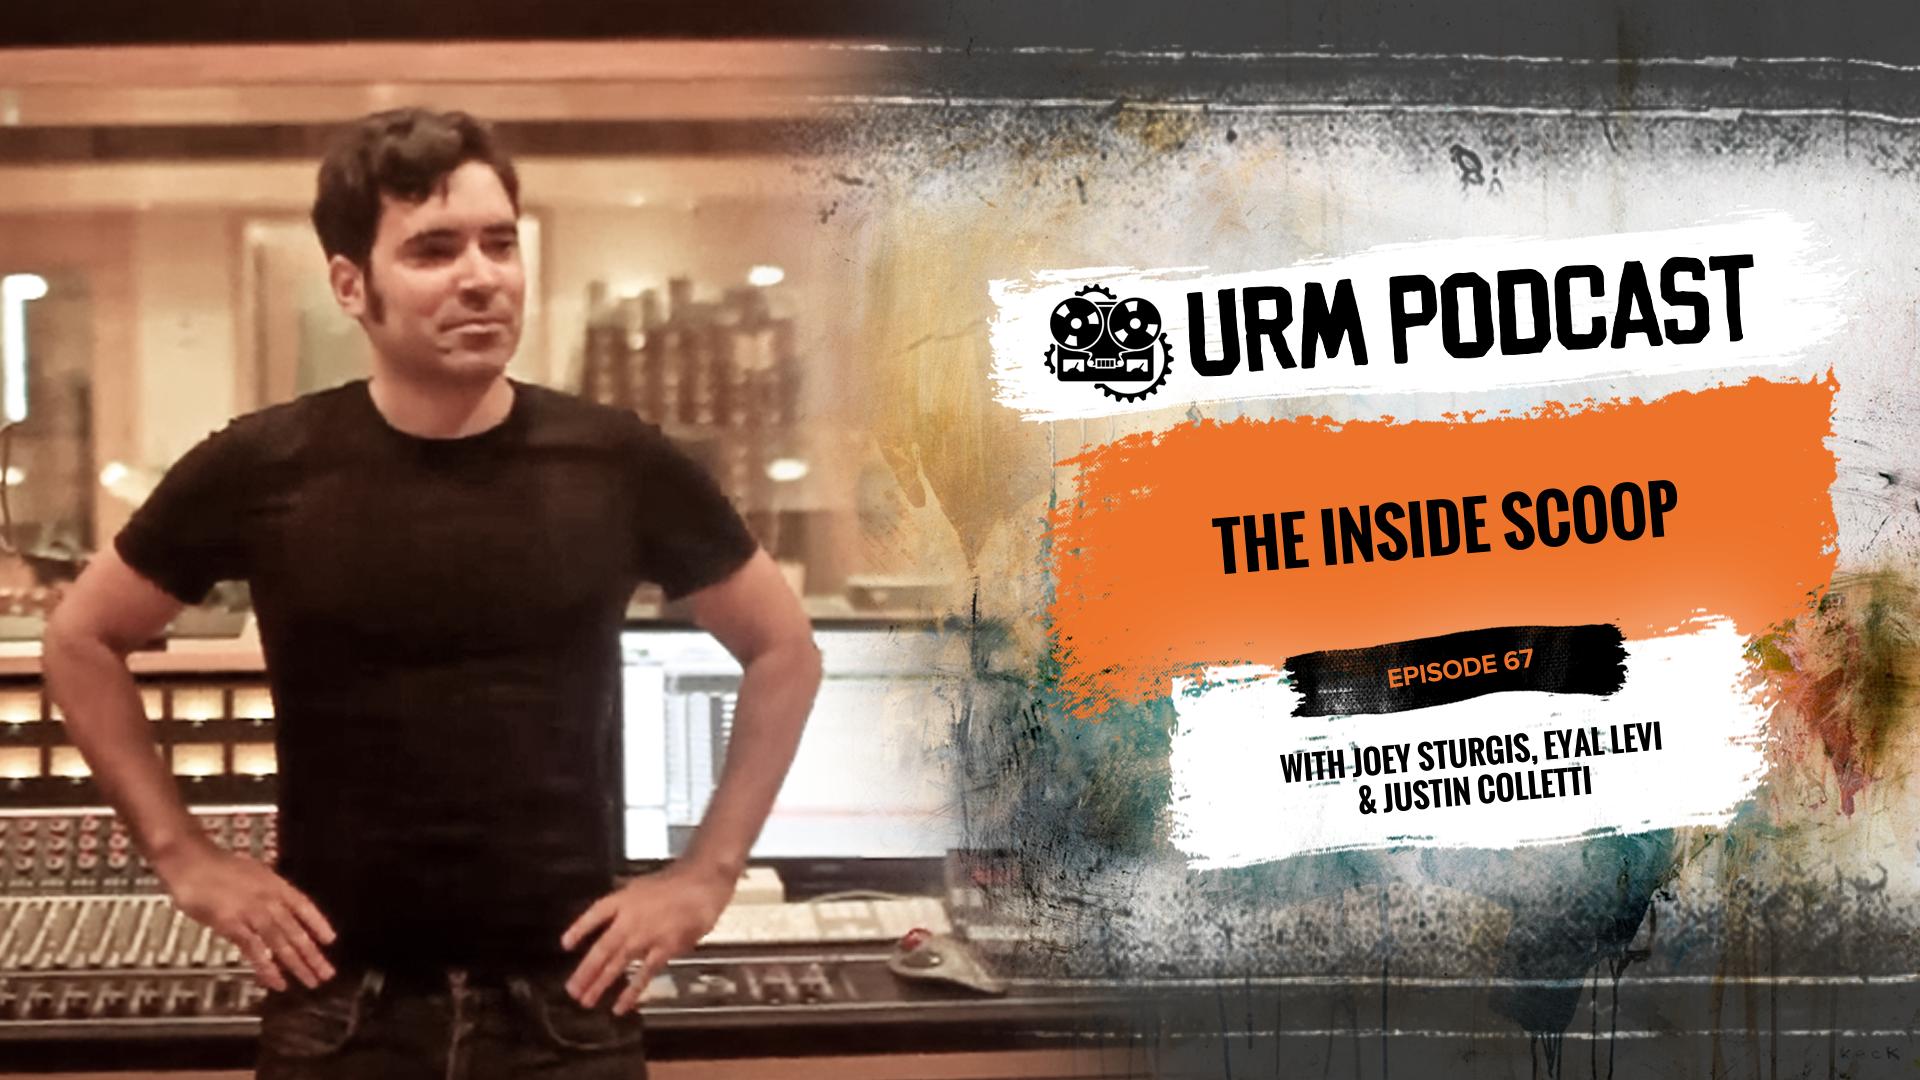 Music Business, Art & Financial Freedom: SonicScoop’s Justin Colletti Featured on the URM Podcast